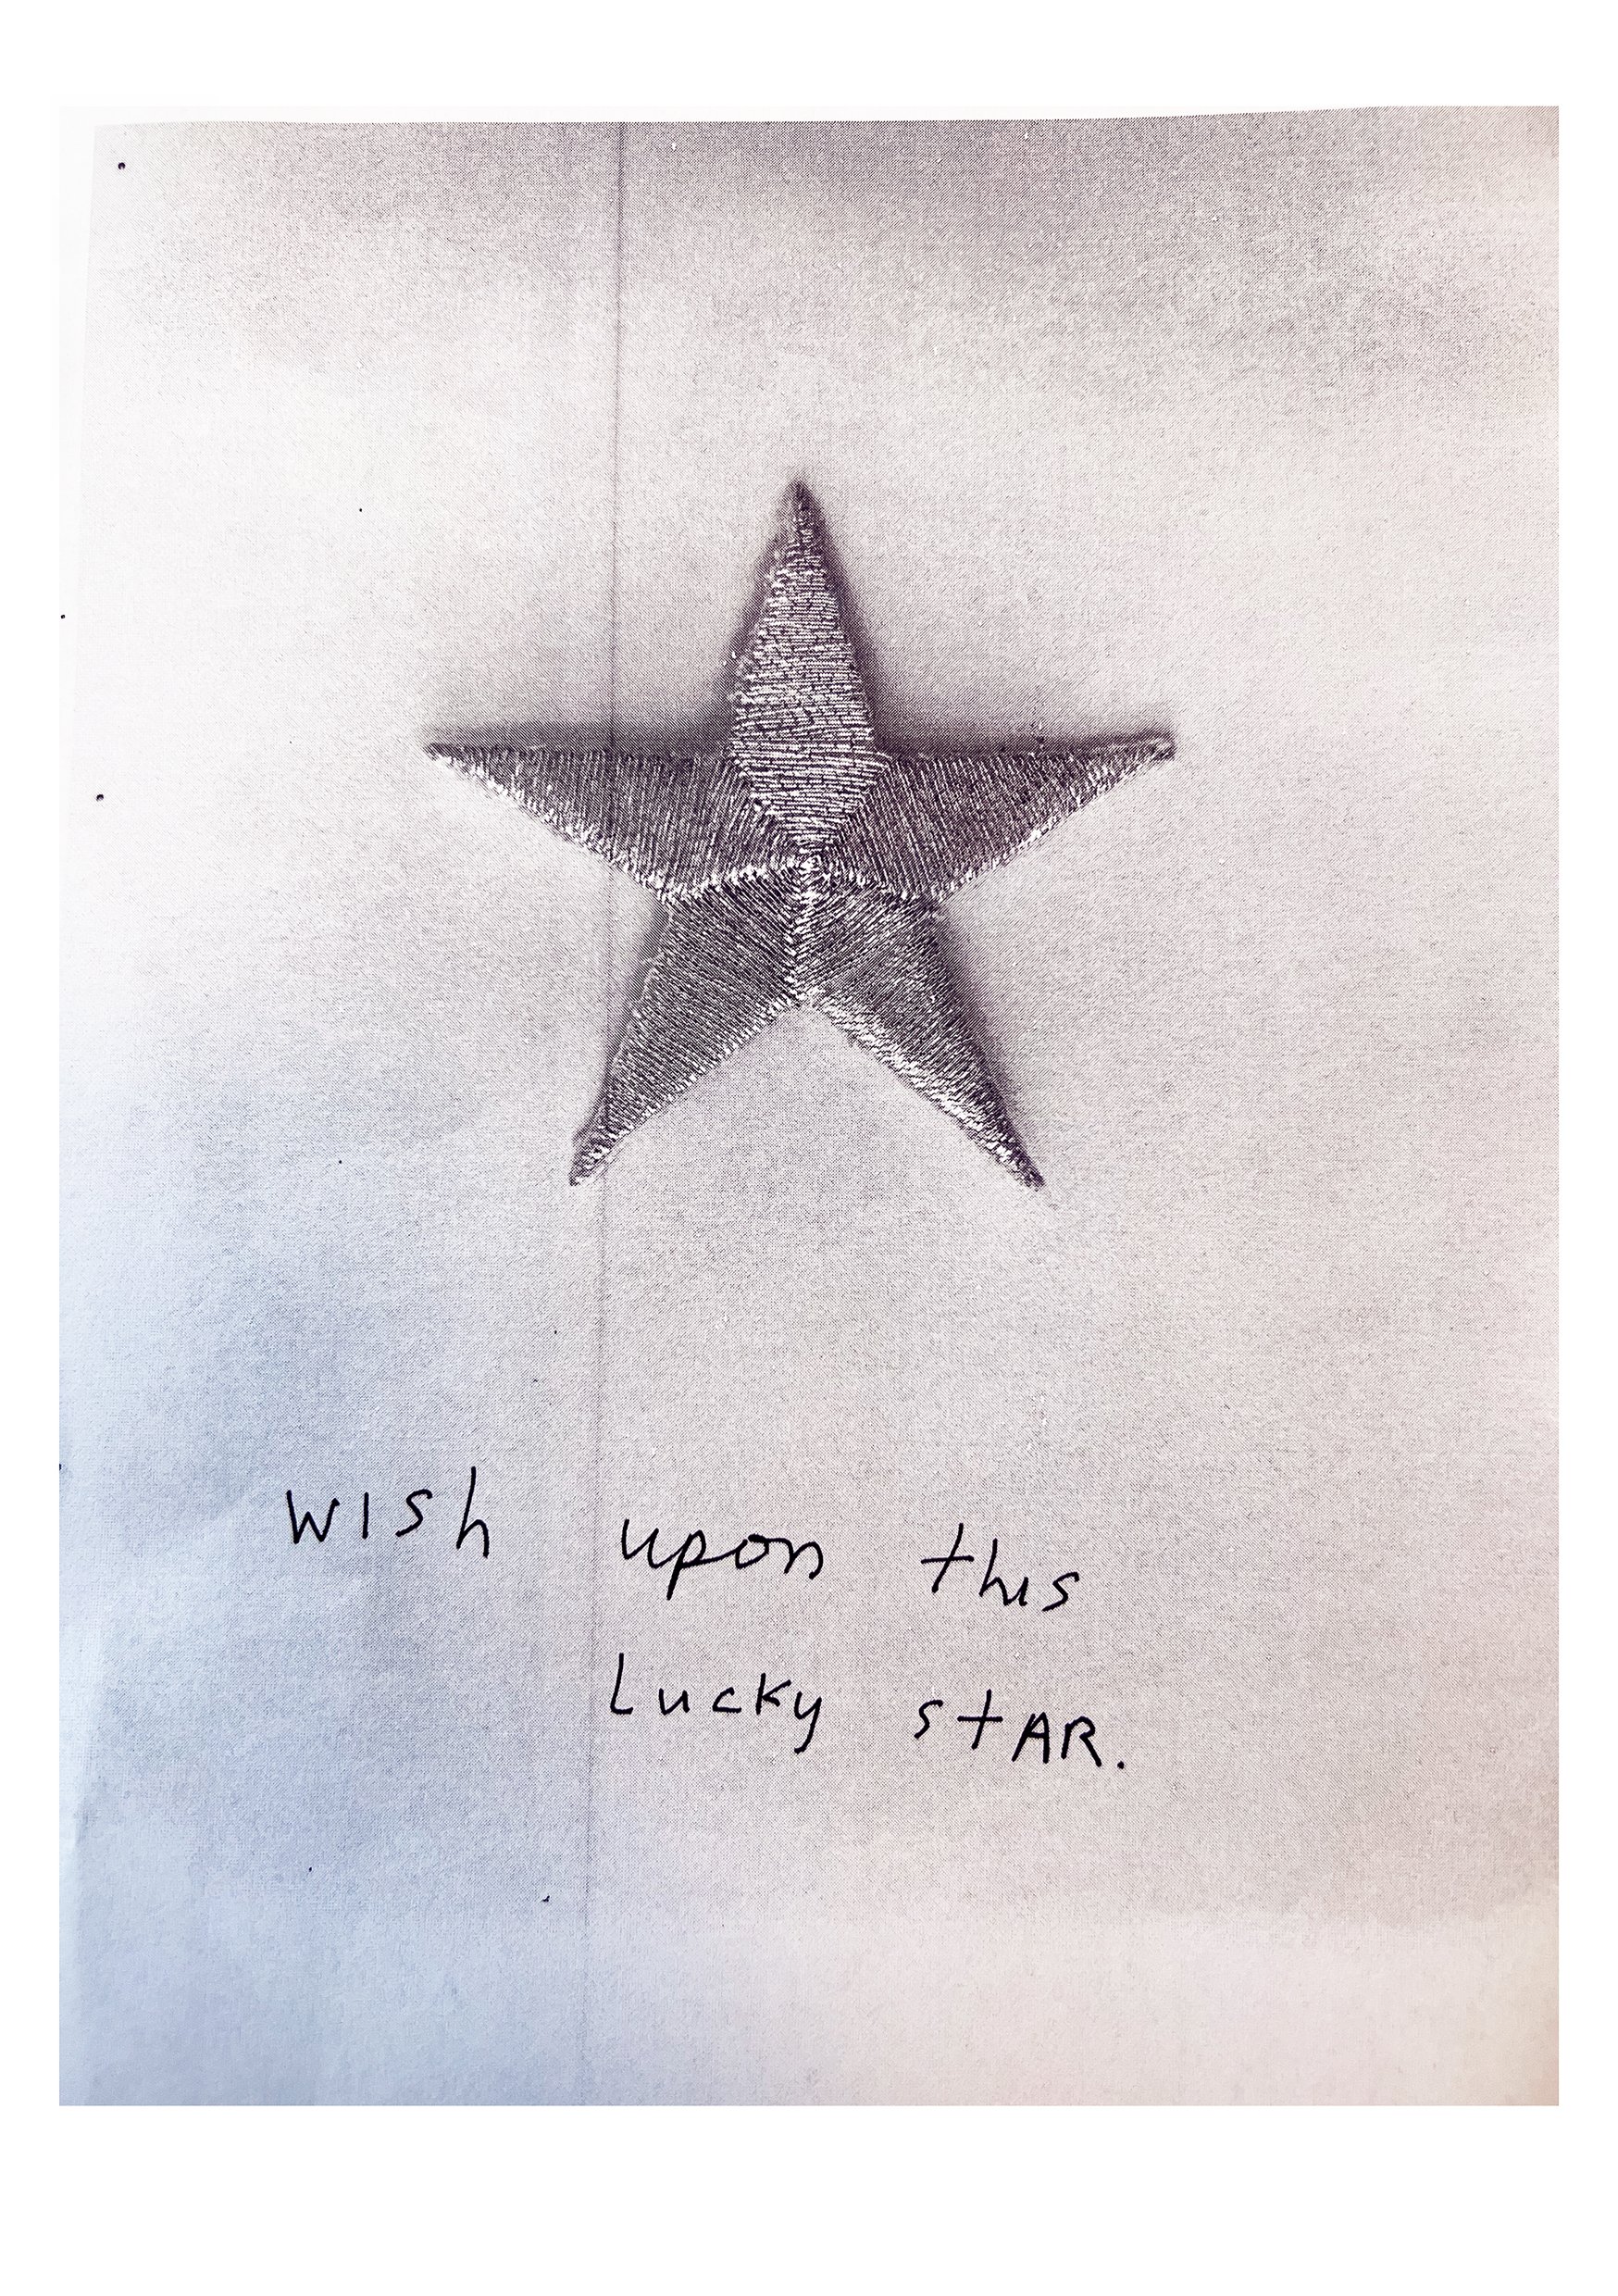 Wish upon this lucky star, 2023